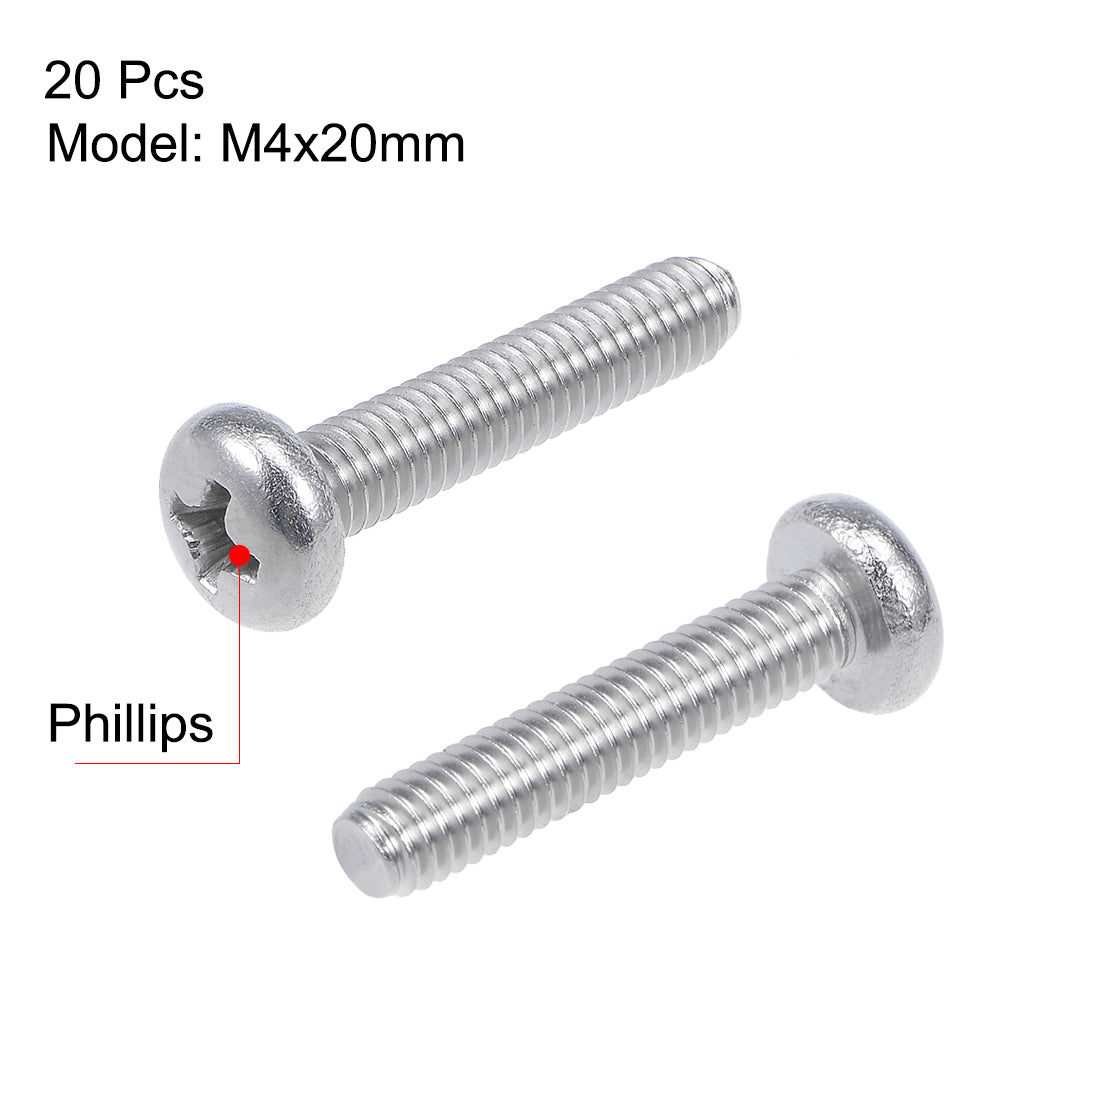 uxcell Uxcell Machine Screws Pan Phillips Head Screw 304 Stainless Steel Fasteners Bolts,20Pcs